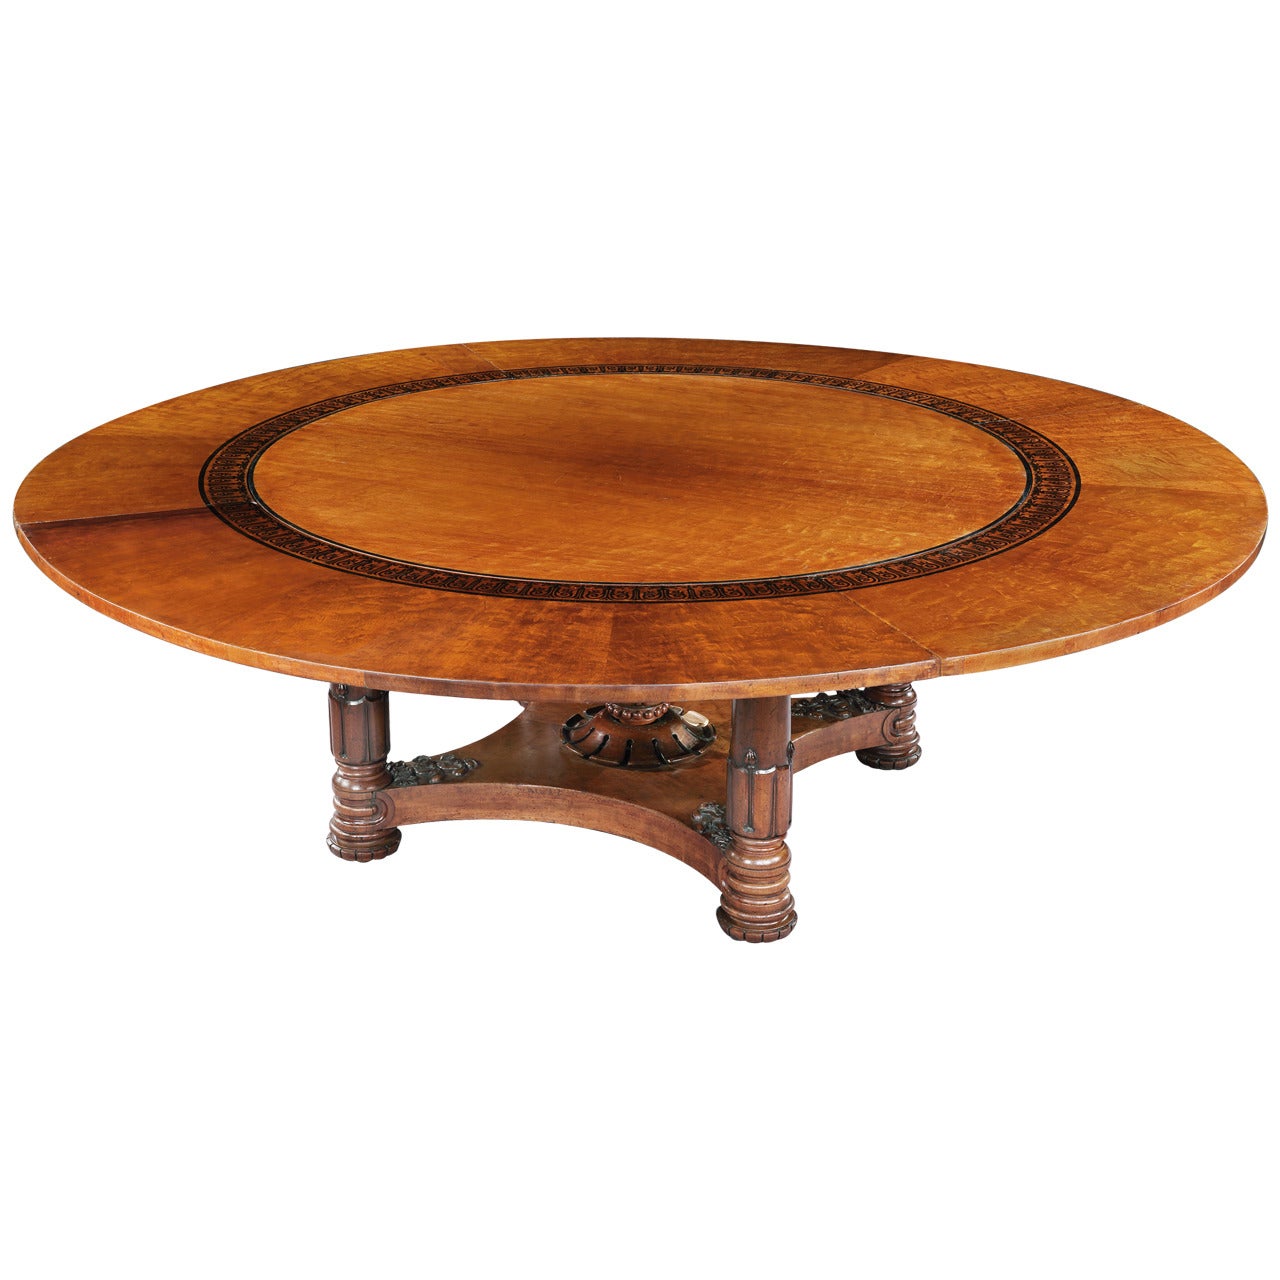 Circular Regency Dining Table of Large Size